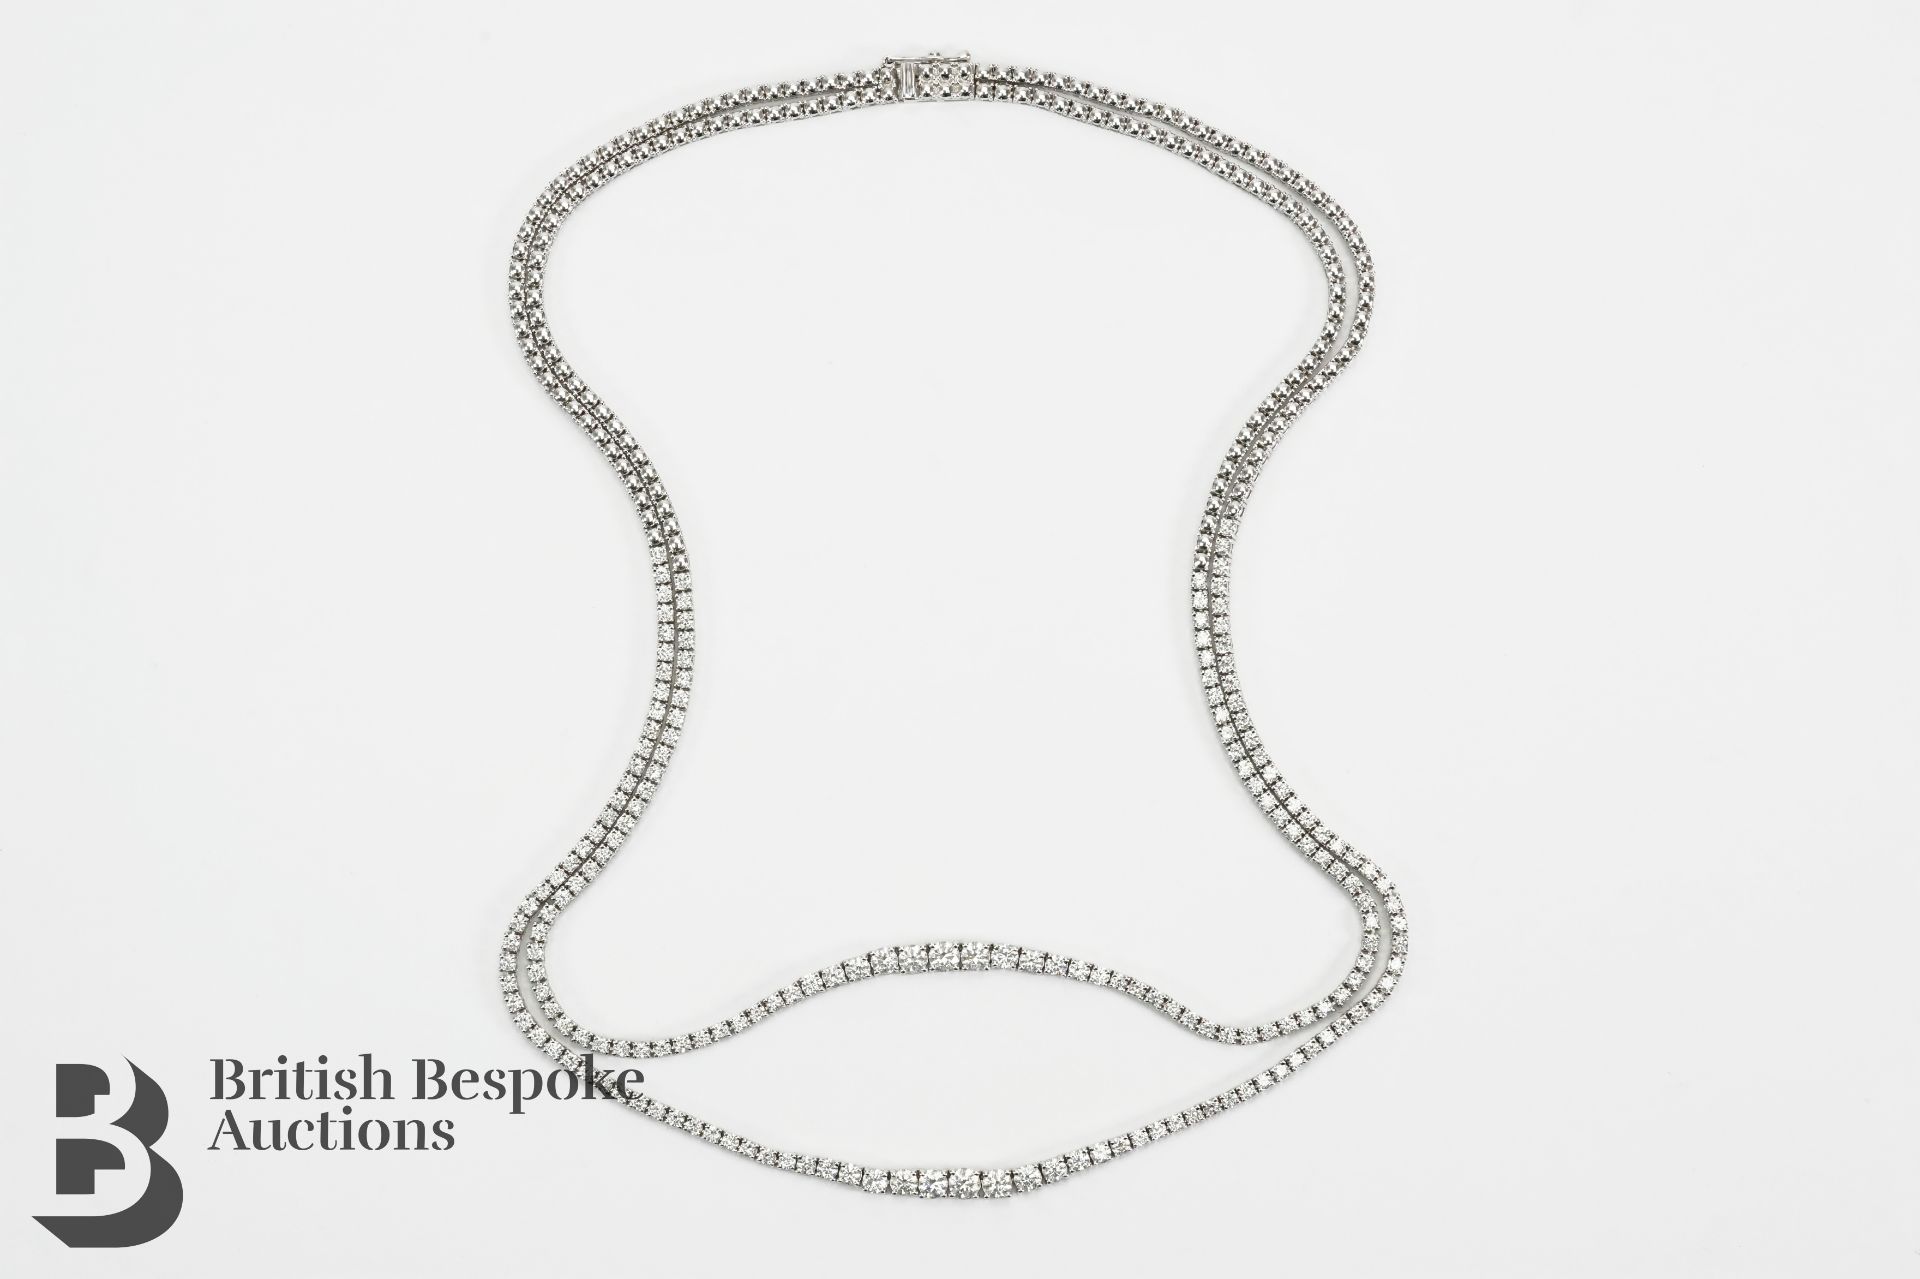 18ct White Gold 7.4ct Diamond Double Strand Necklace - Image 5 of 9